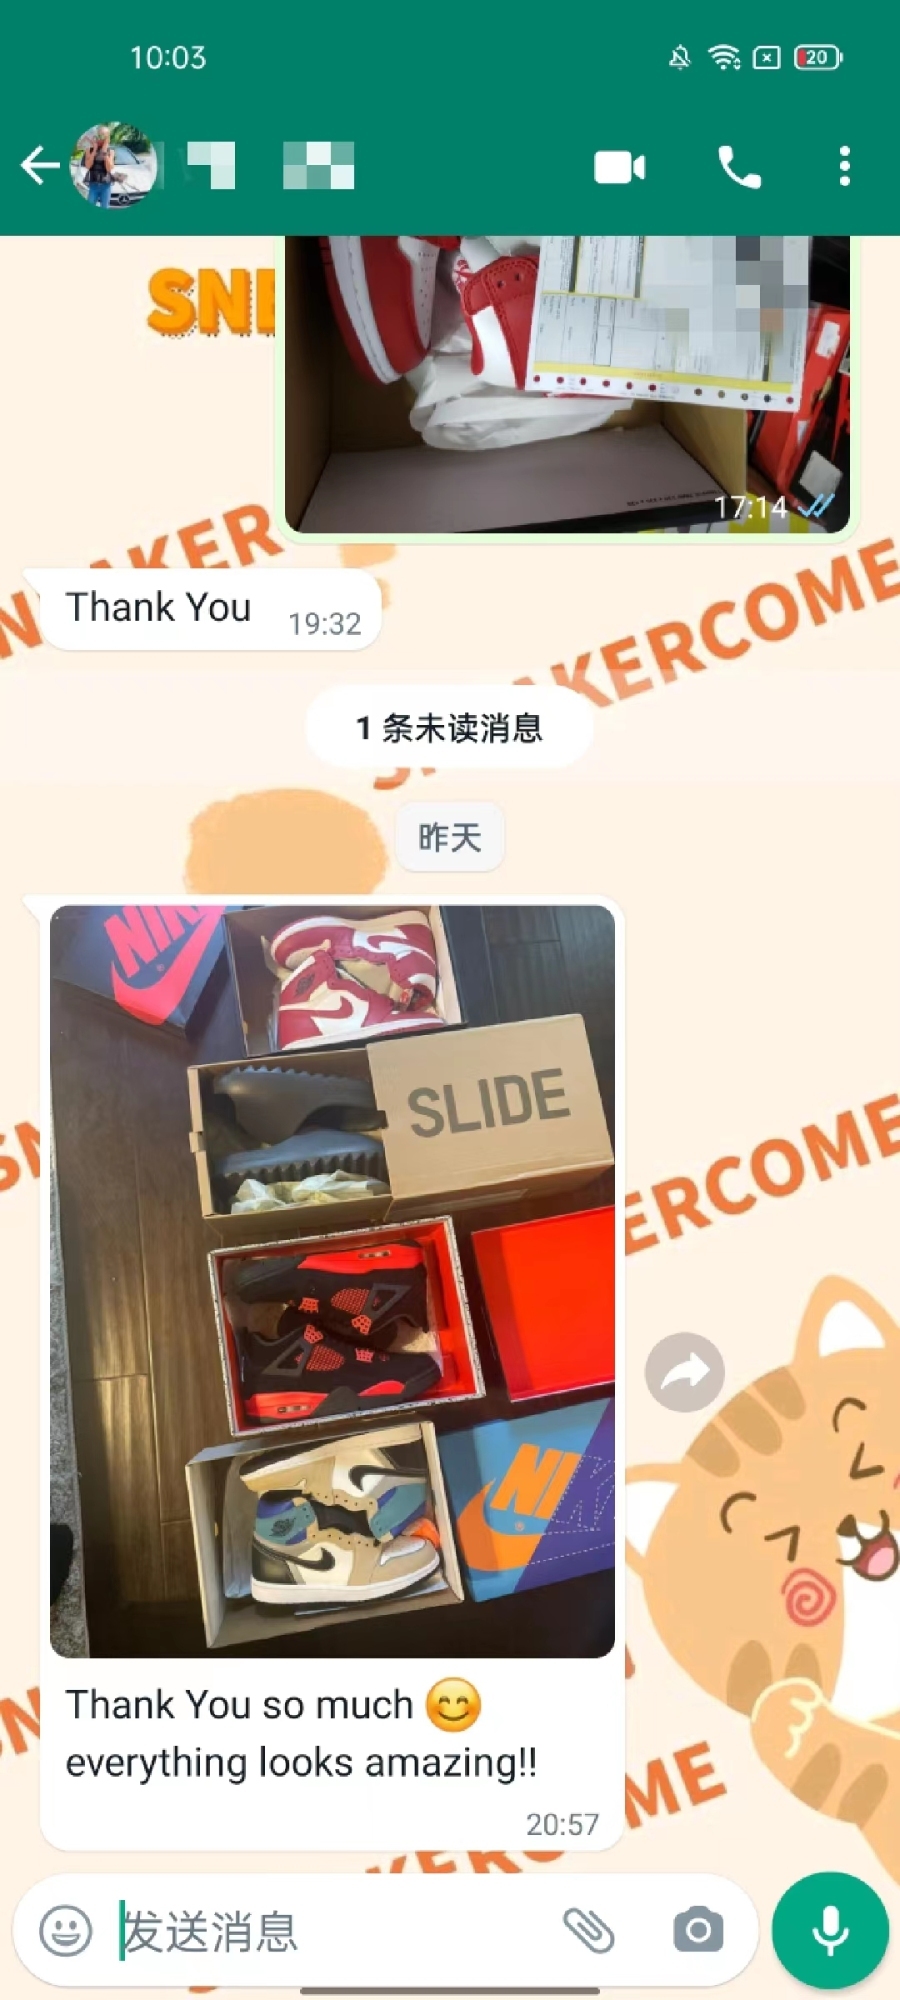 Review of 4 hot shoes from sneakercome customer💕